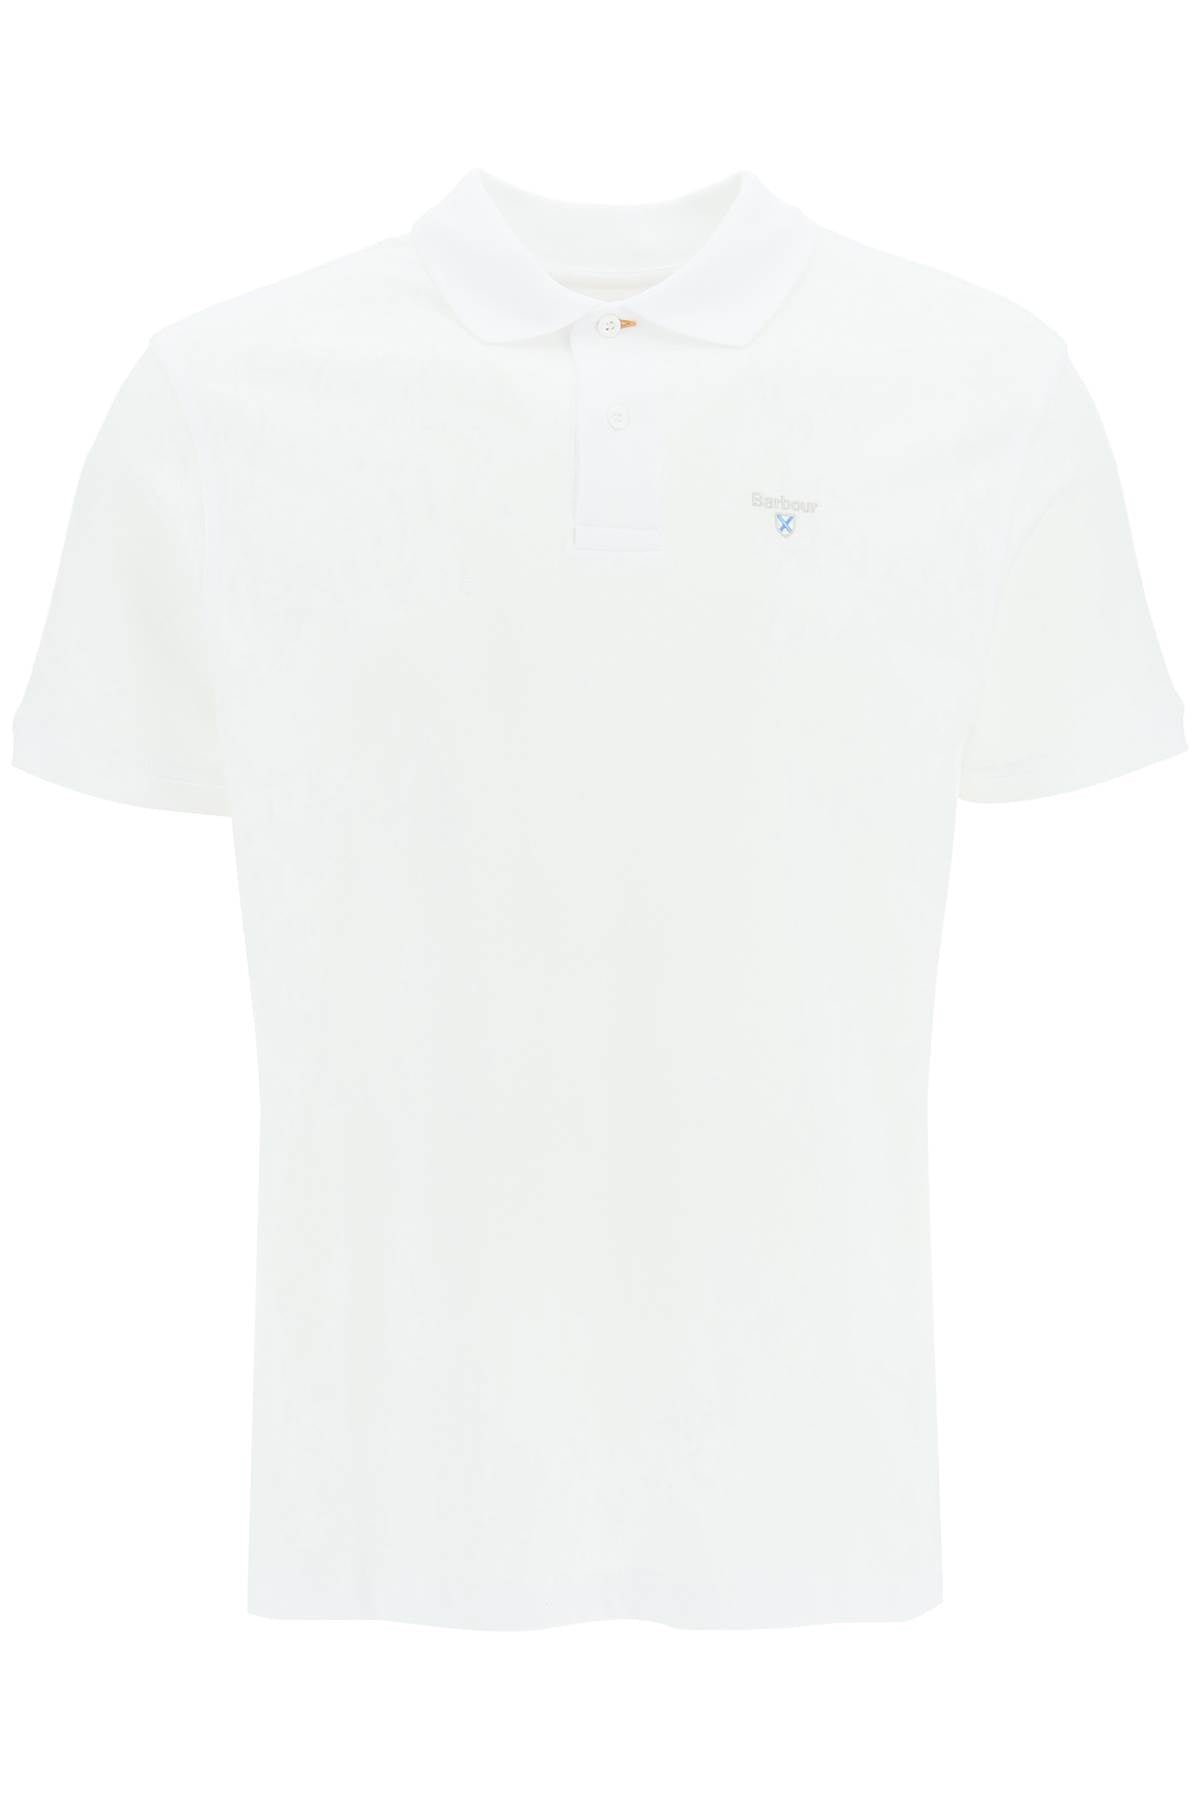 Barbour polo shirt with embroidery MML0358 WHITE